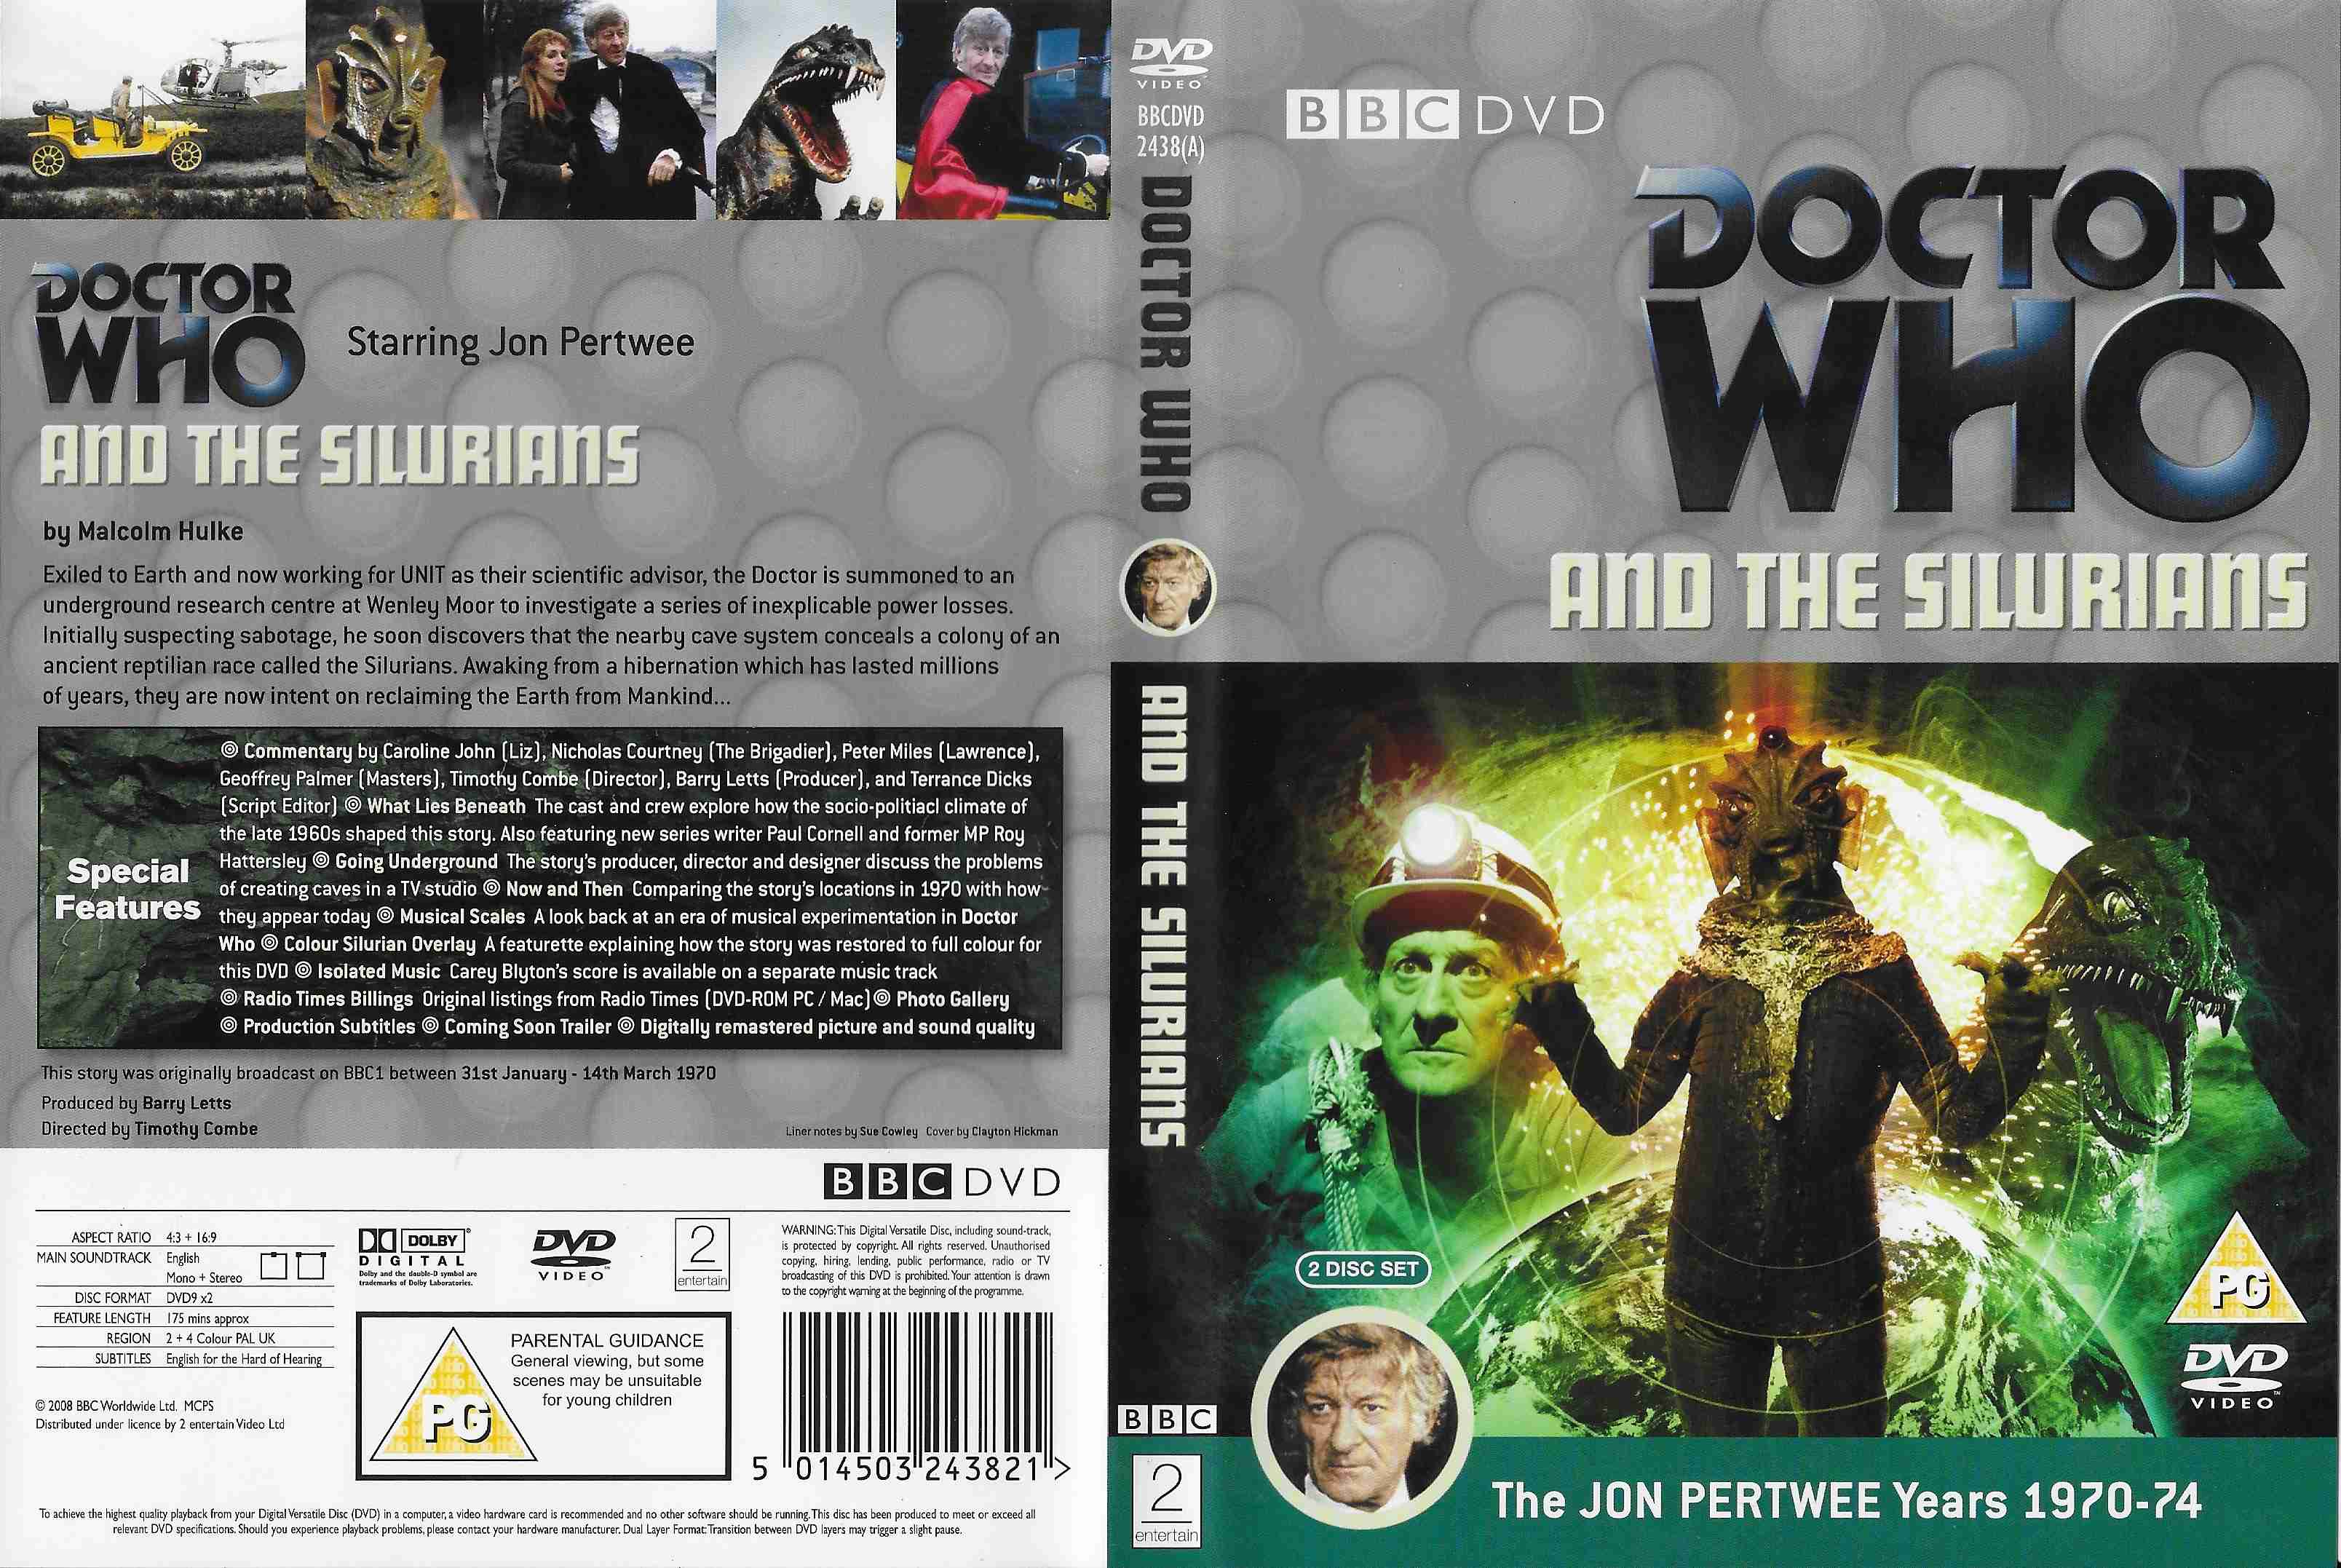 Picture of BBCDVD 2438A Doctor Who - The Silurians by artist Malcolm Hulke from the BBC records and Tapes library